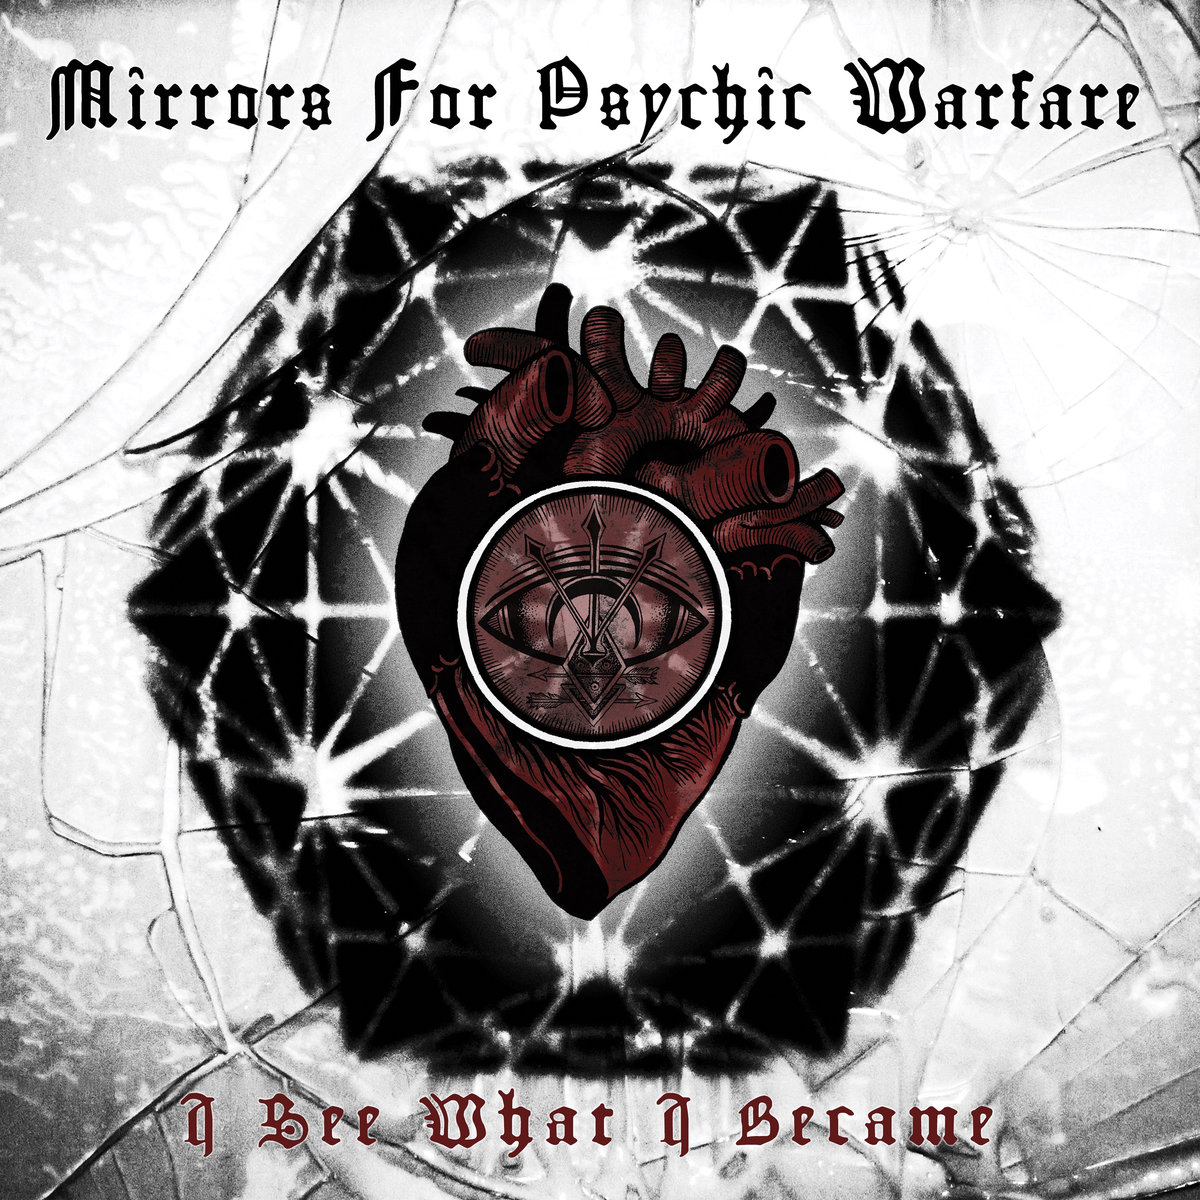 Mirrors for Psychic Warfare - I See What I Became